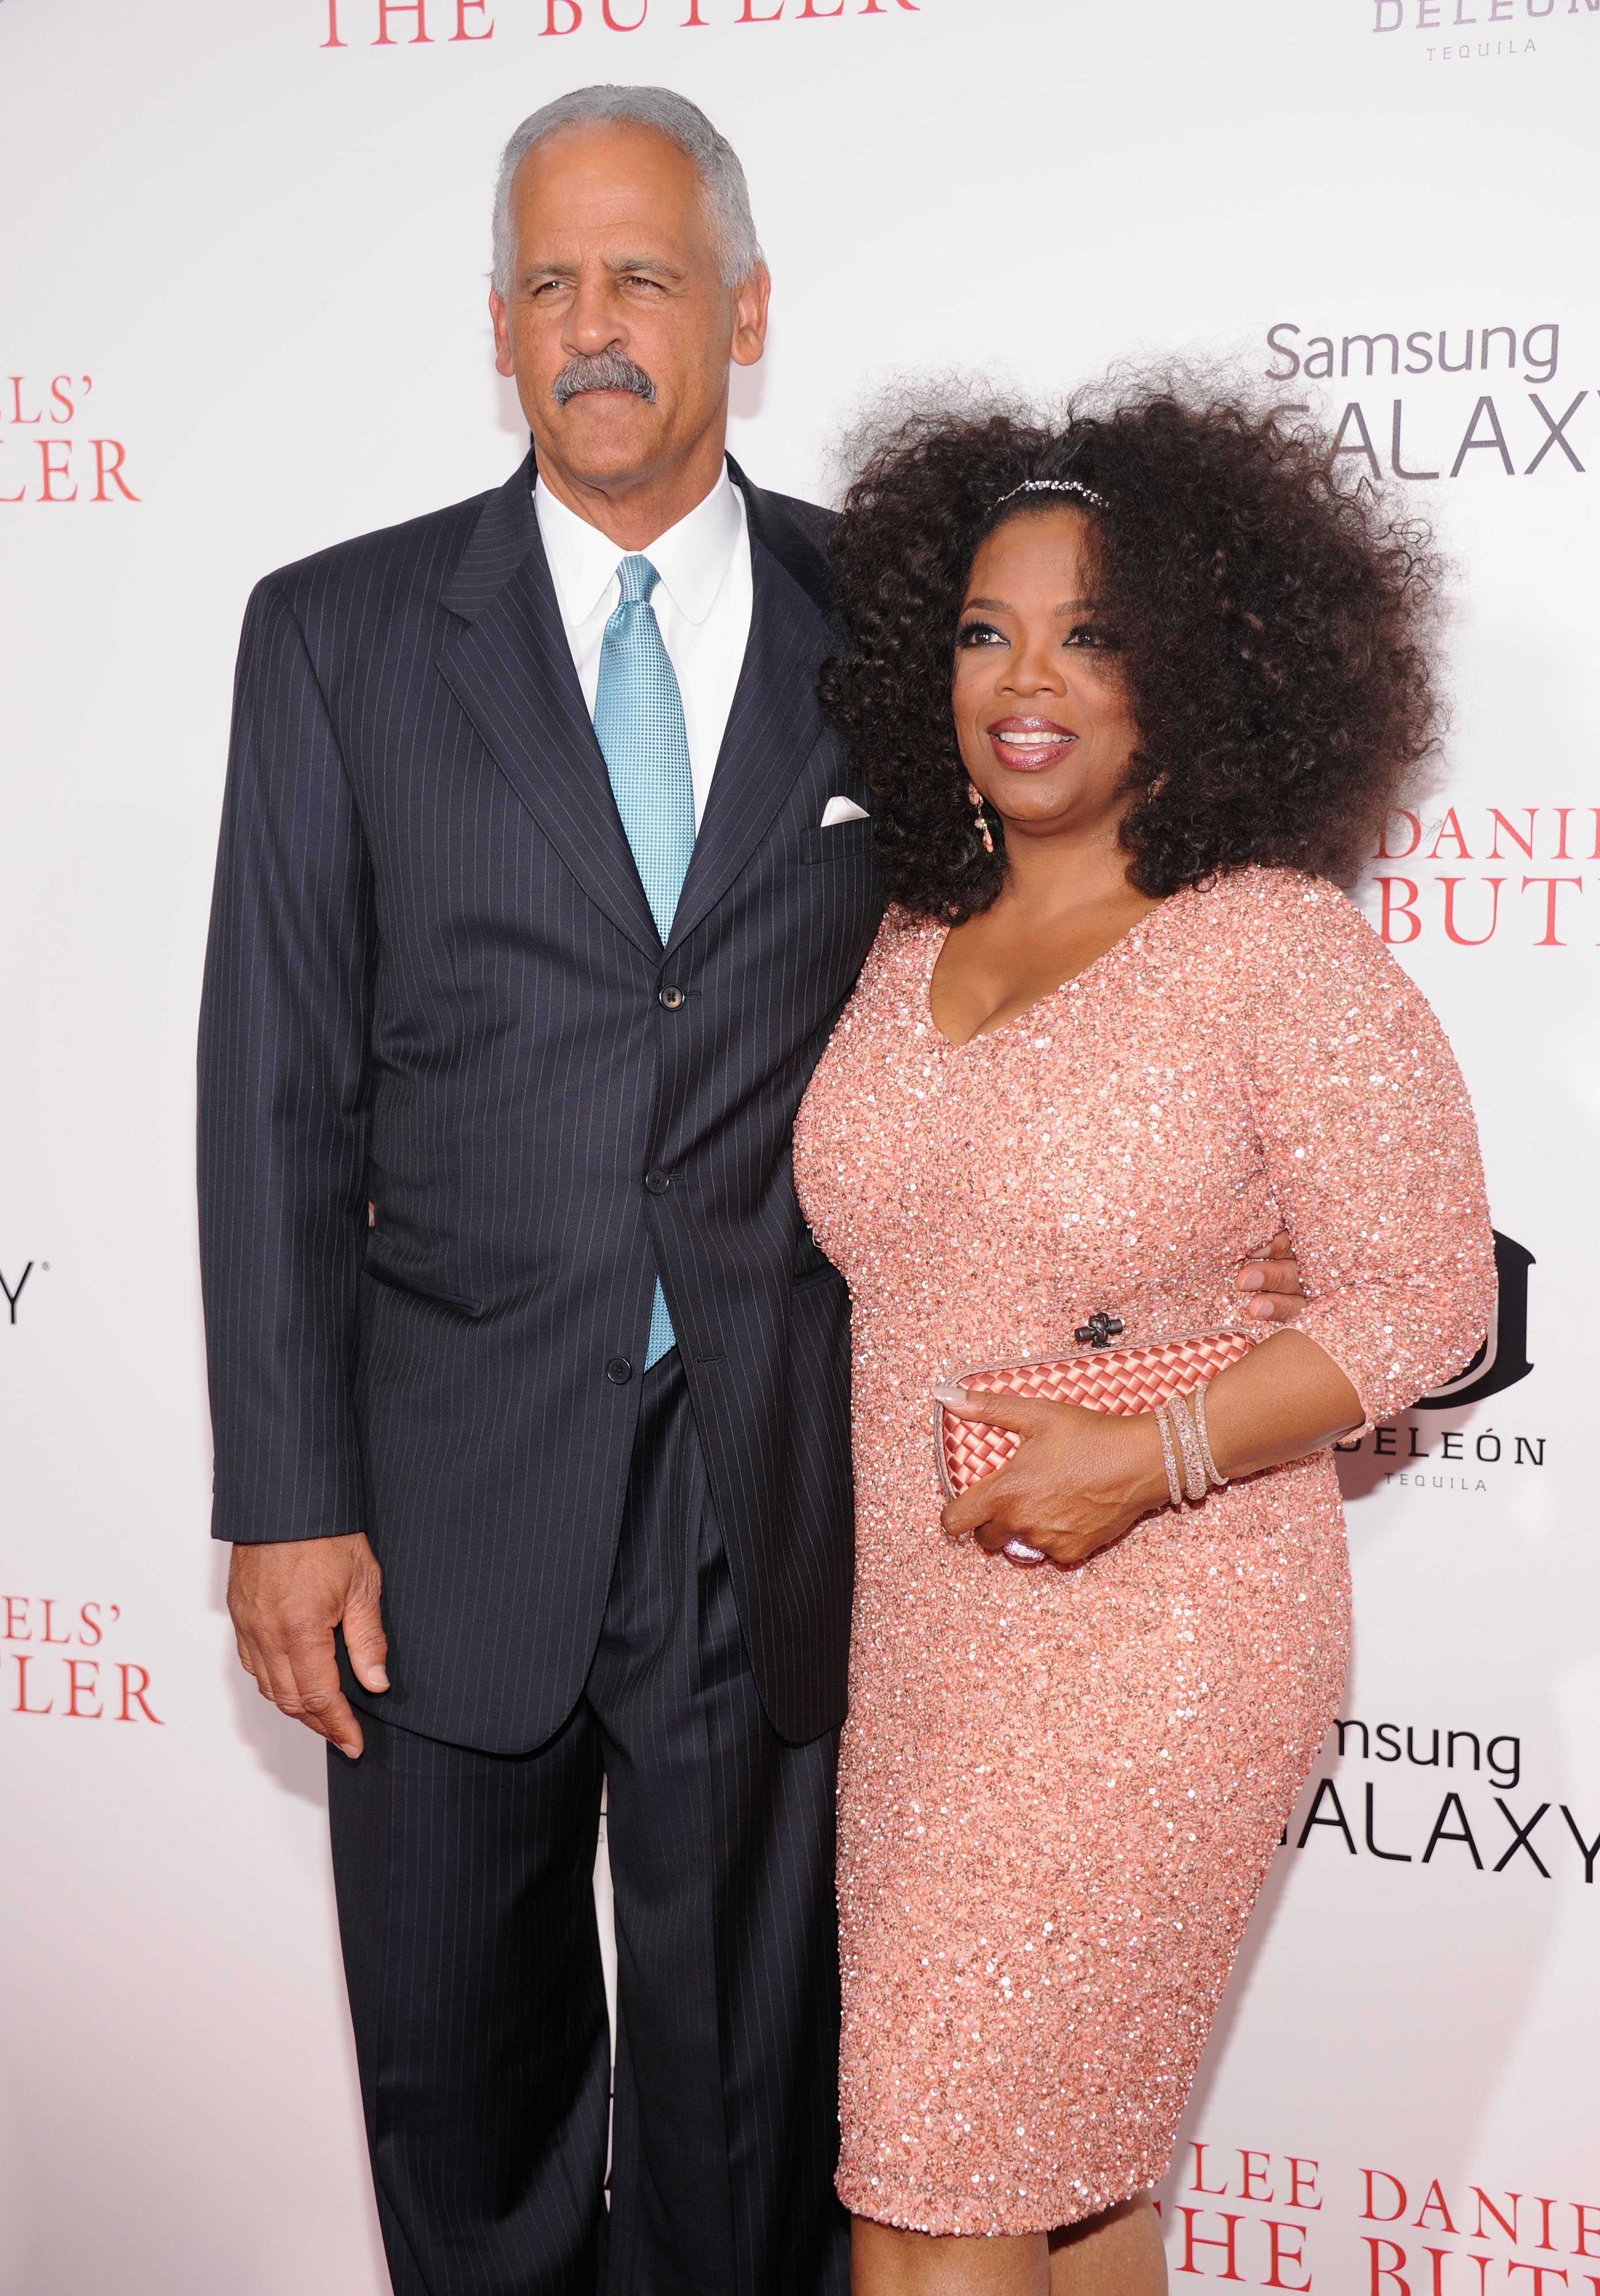 Oprah Winfrey and Stedman Graham attend Lee Daniels' "The Butler" New York Premiere at Ziegfeld Theater on August 5, 2013. | Photo: GettyImages